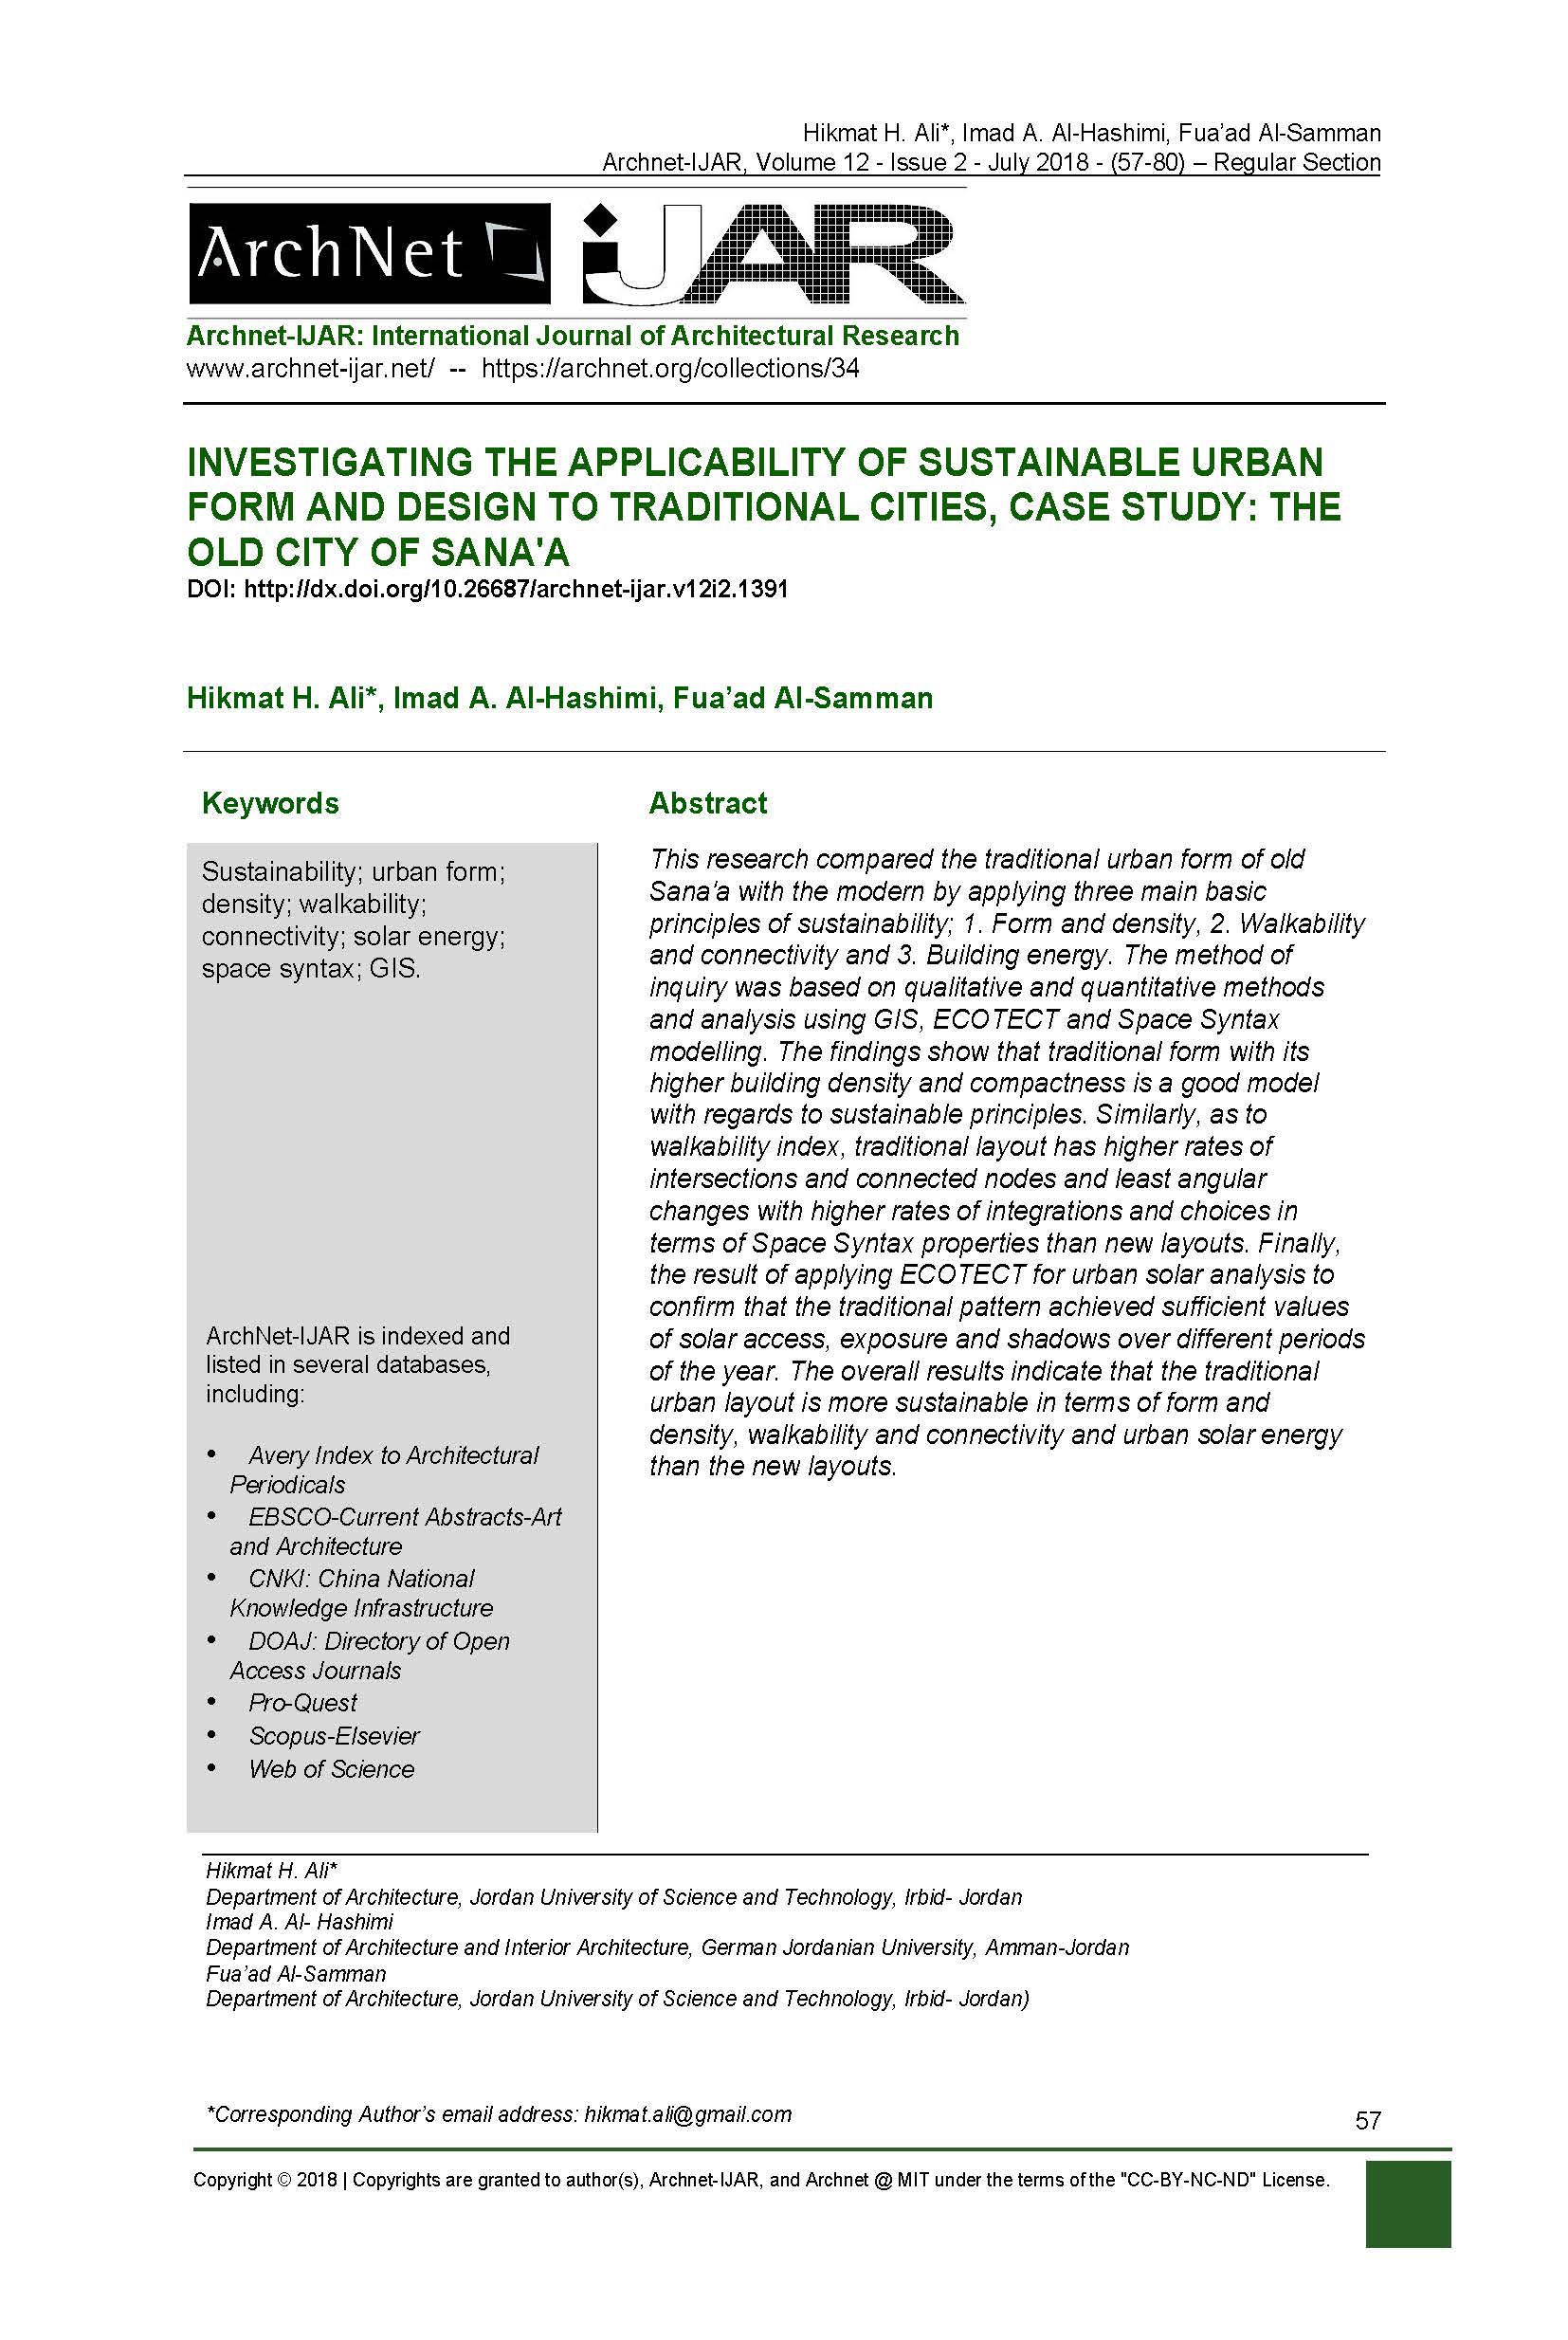 Investigating the Applicability of Sustainable Urban Form and Design to Traditional Cities, Case Study: The Old City of Sana'a